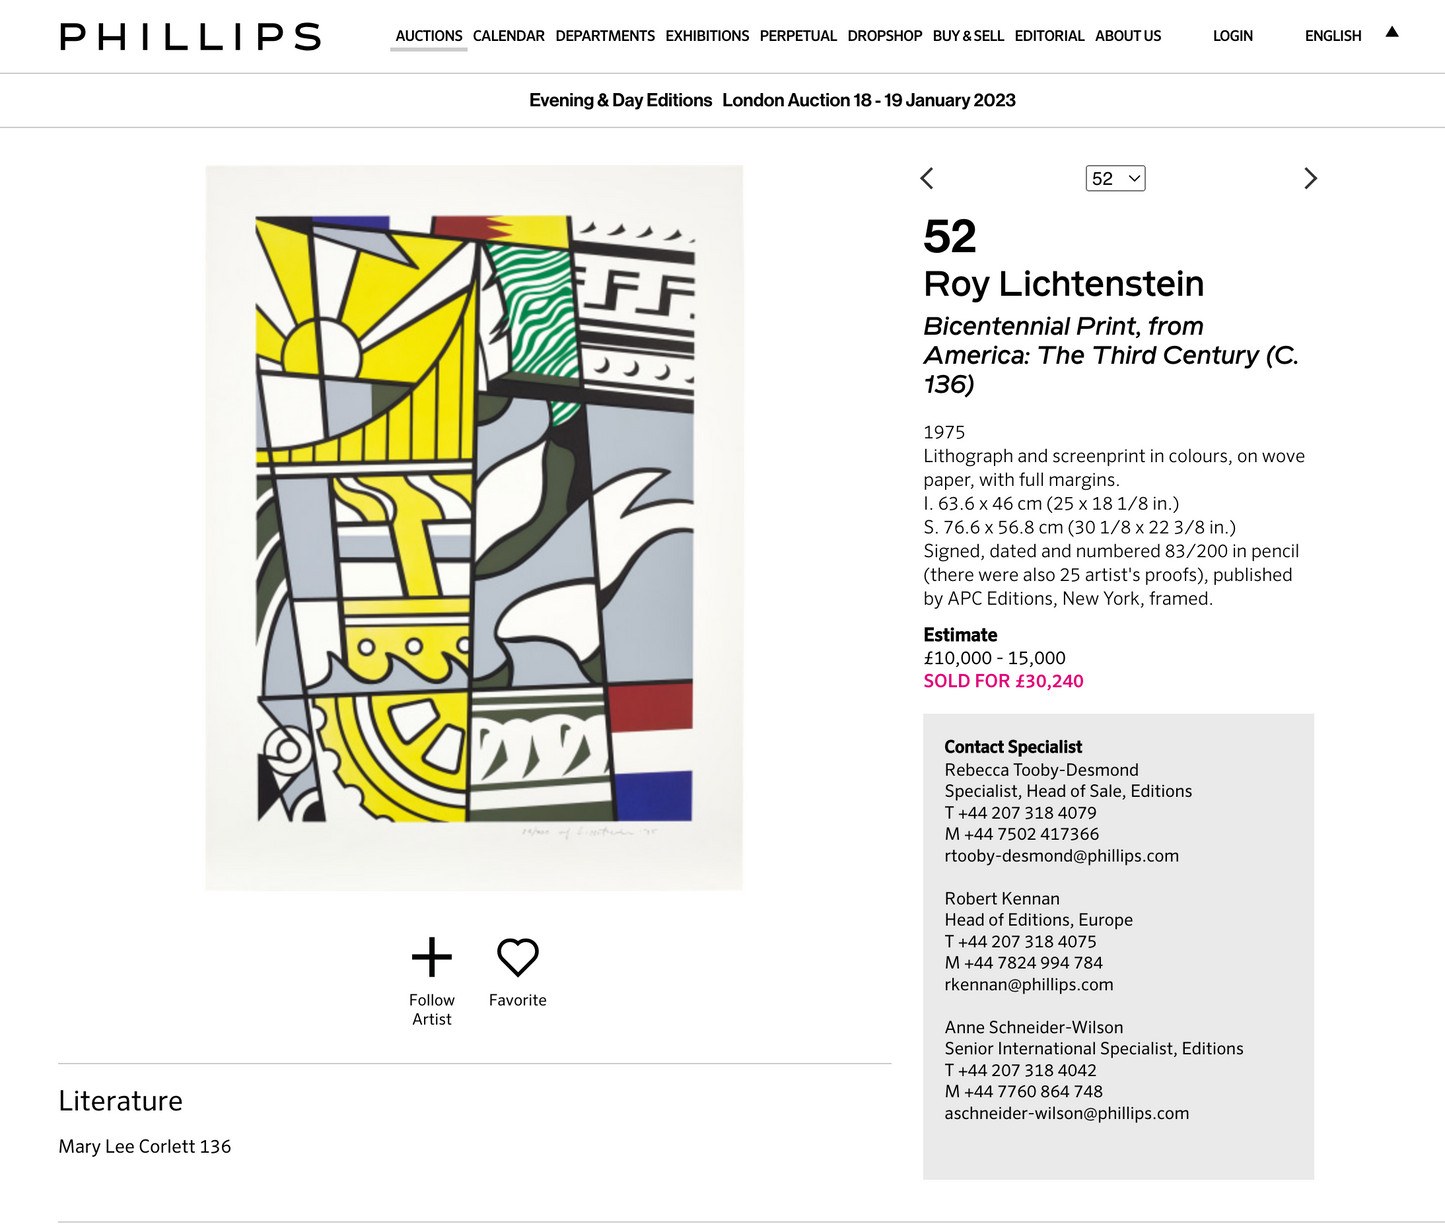 Faded impression Roy Lichtenstein Bicentennial Print realized $38,000 at Phillips London, January 19, 2023